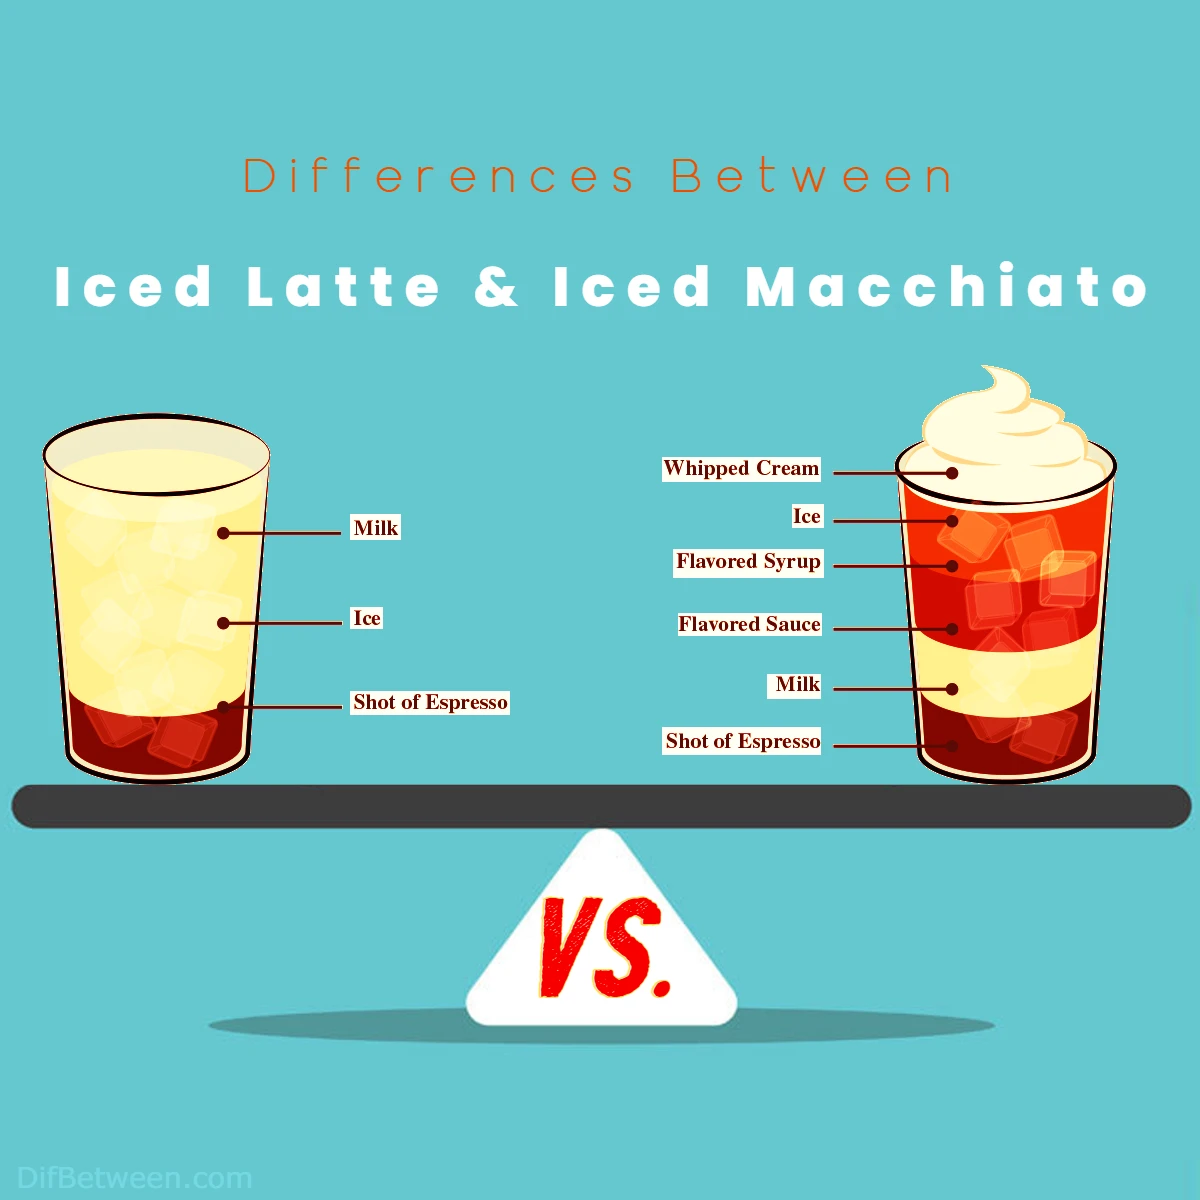 Differences Between Iced Macchiato and Iced Latte